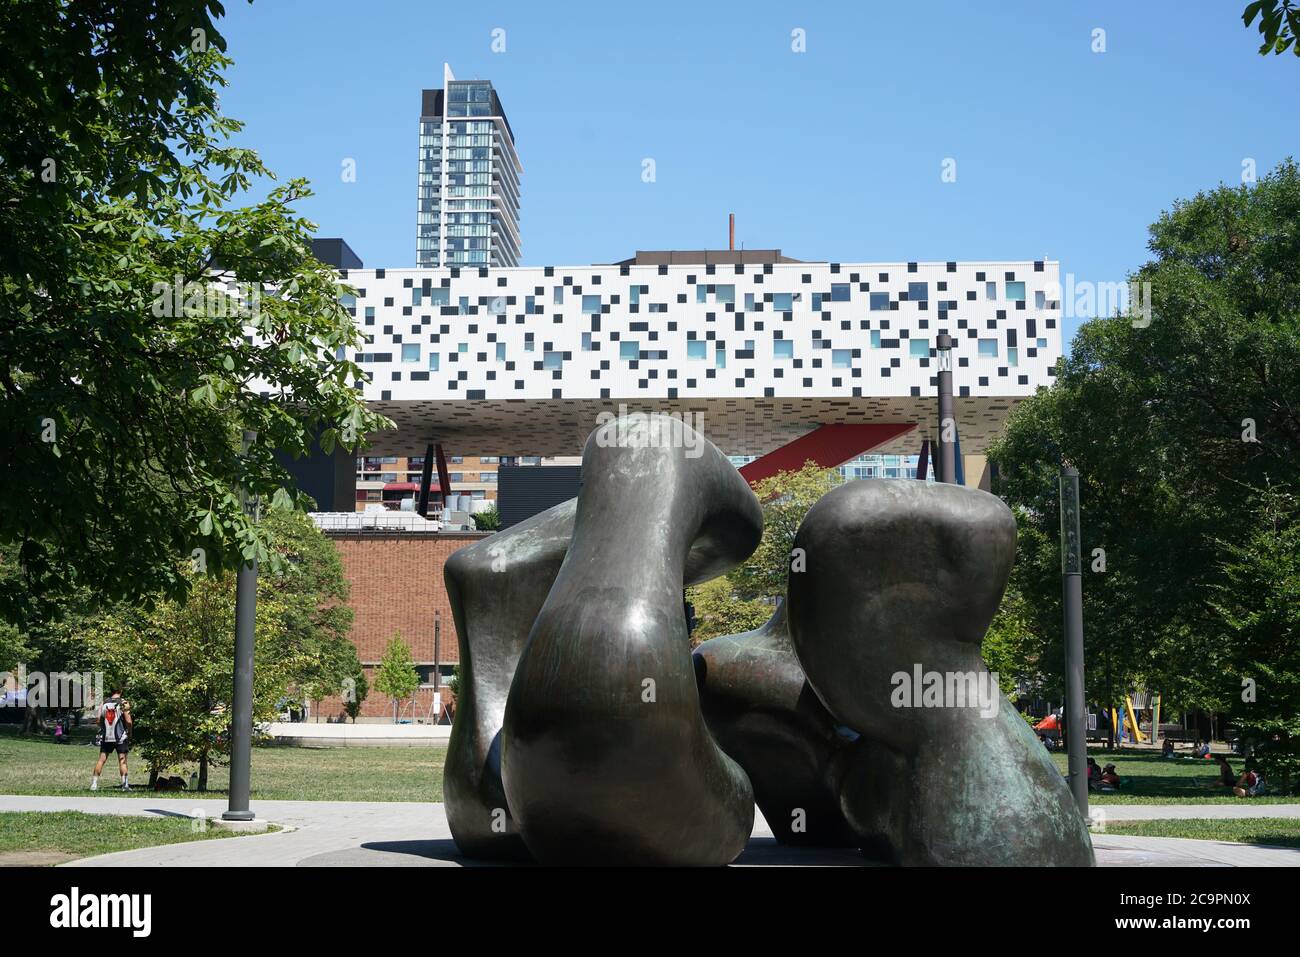 Toronto, Canada - July 31, 2020: Grange Park, with a sculpture by Henry Moore, and the Ontario College of Art and Design in the background Stock Photo